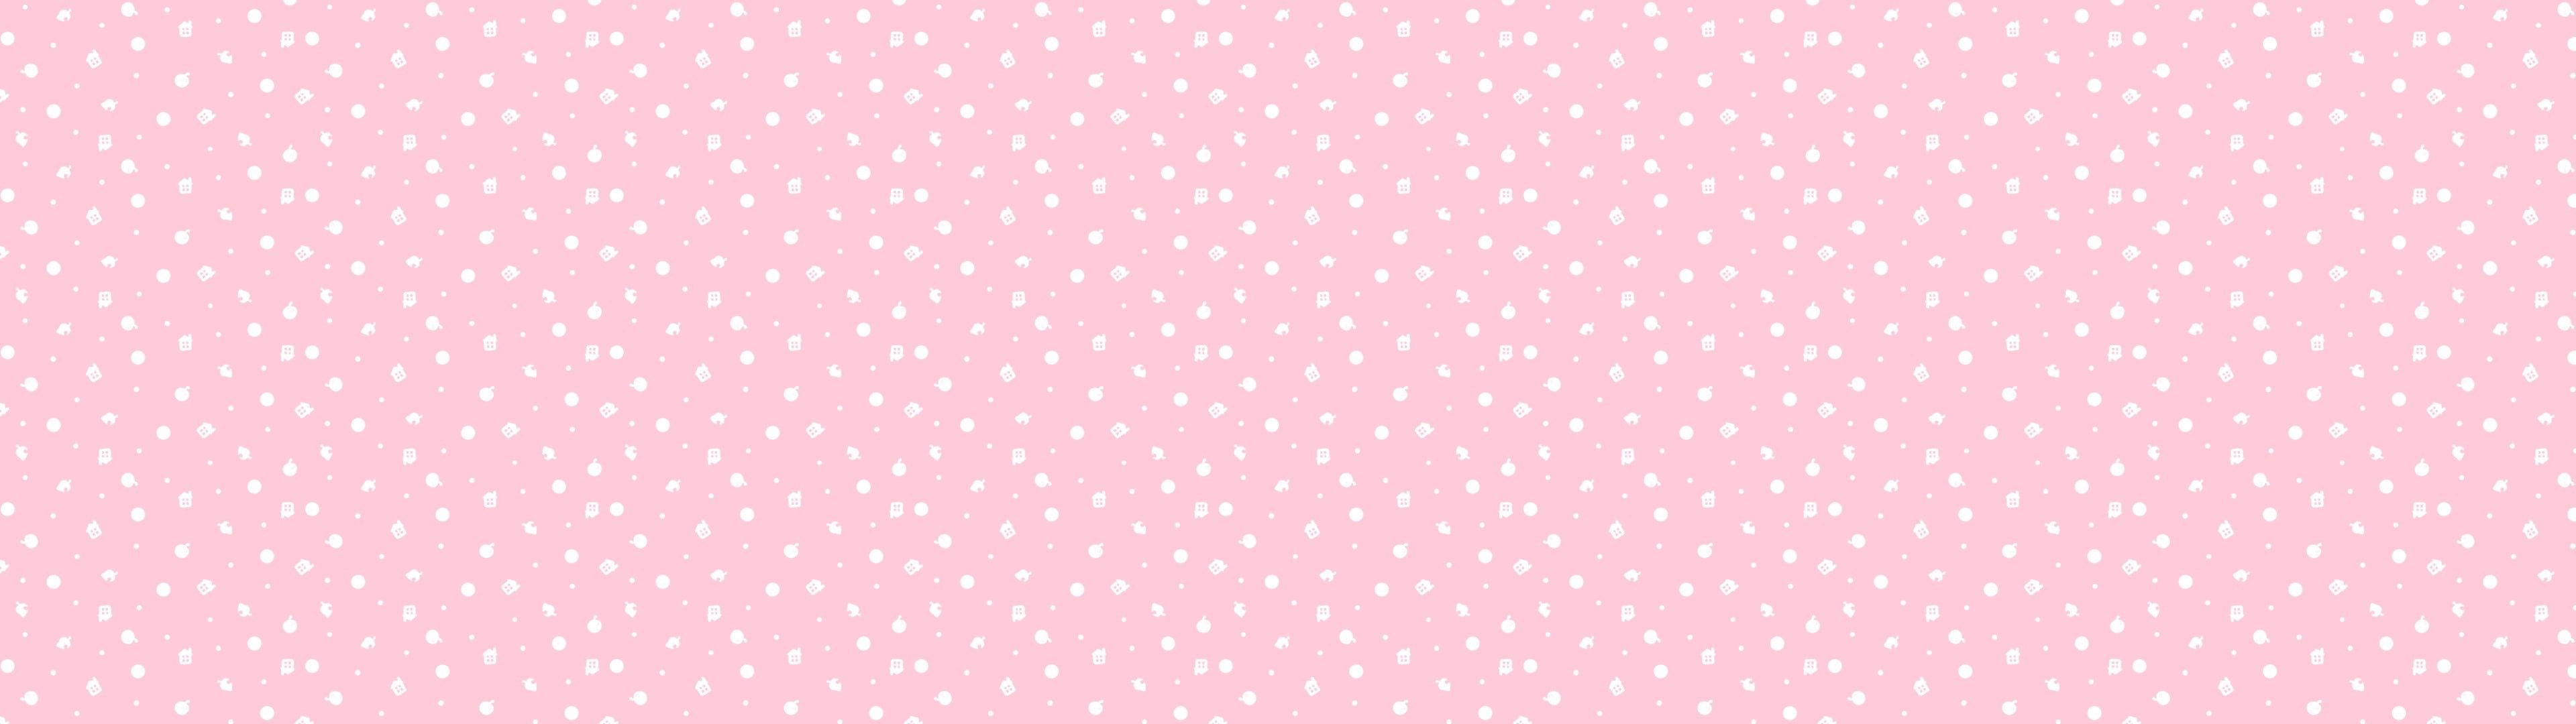 A pink background with white polka dots - YouTube